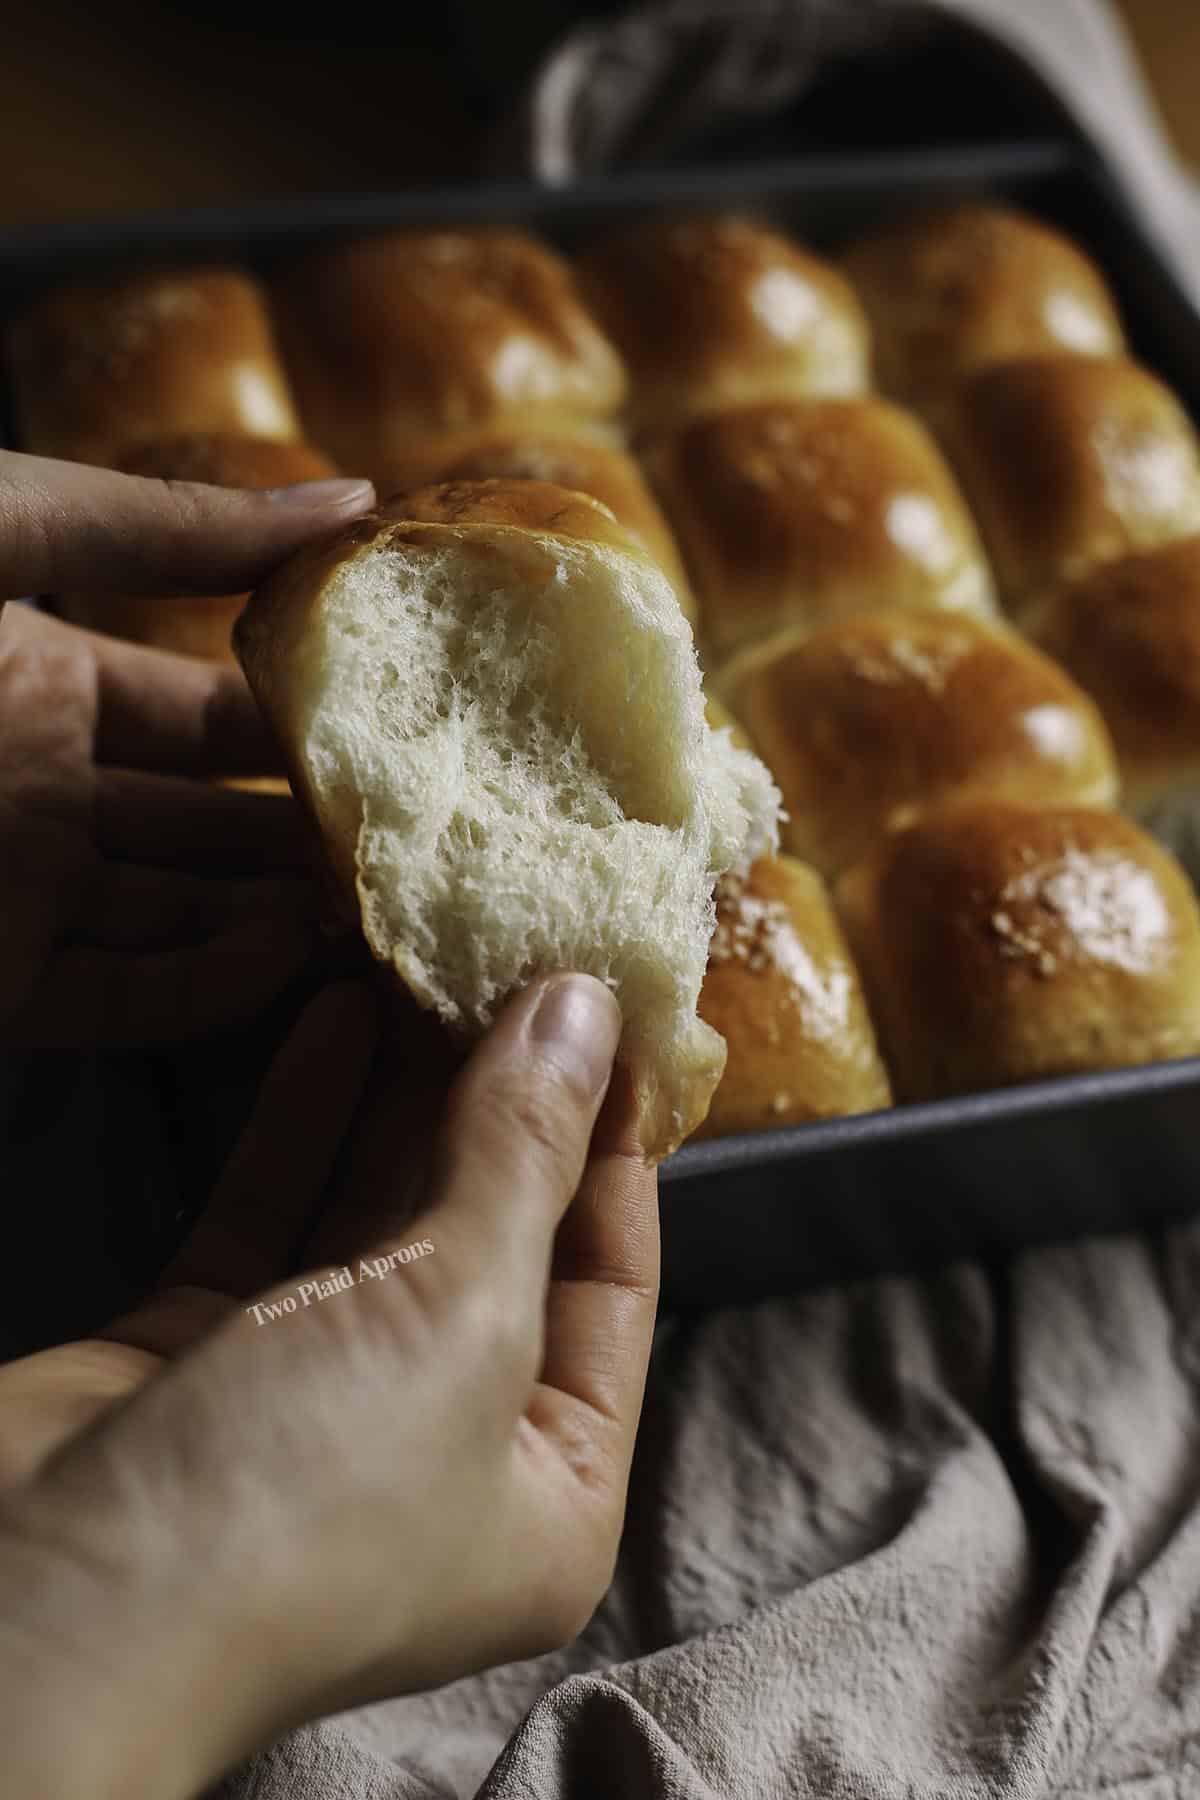 Showing fluffy interior of milk bread made with tangzhong.